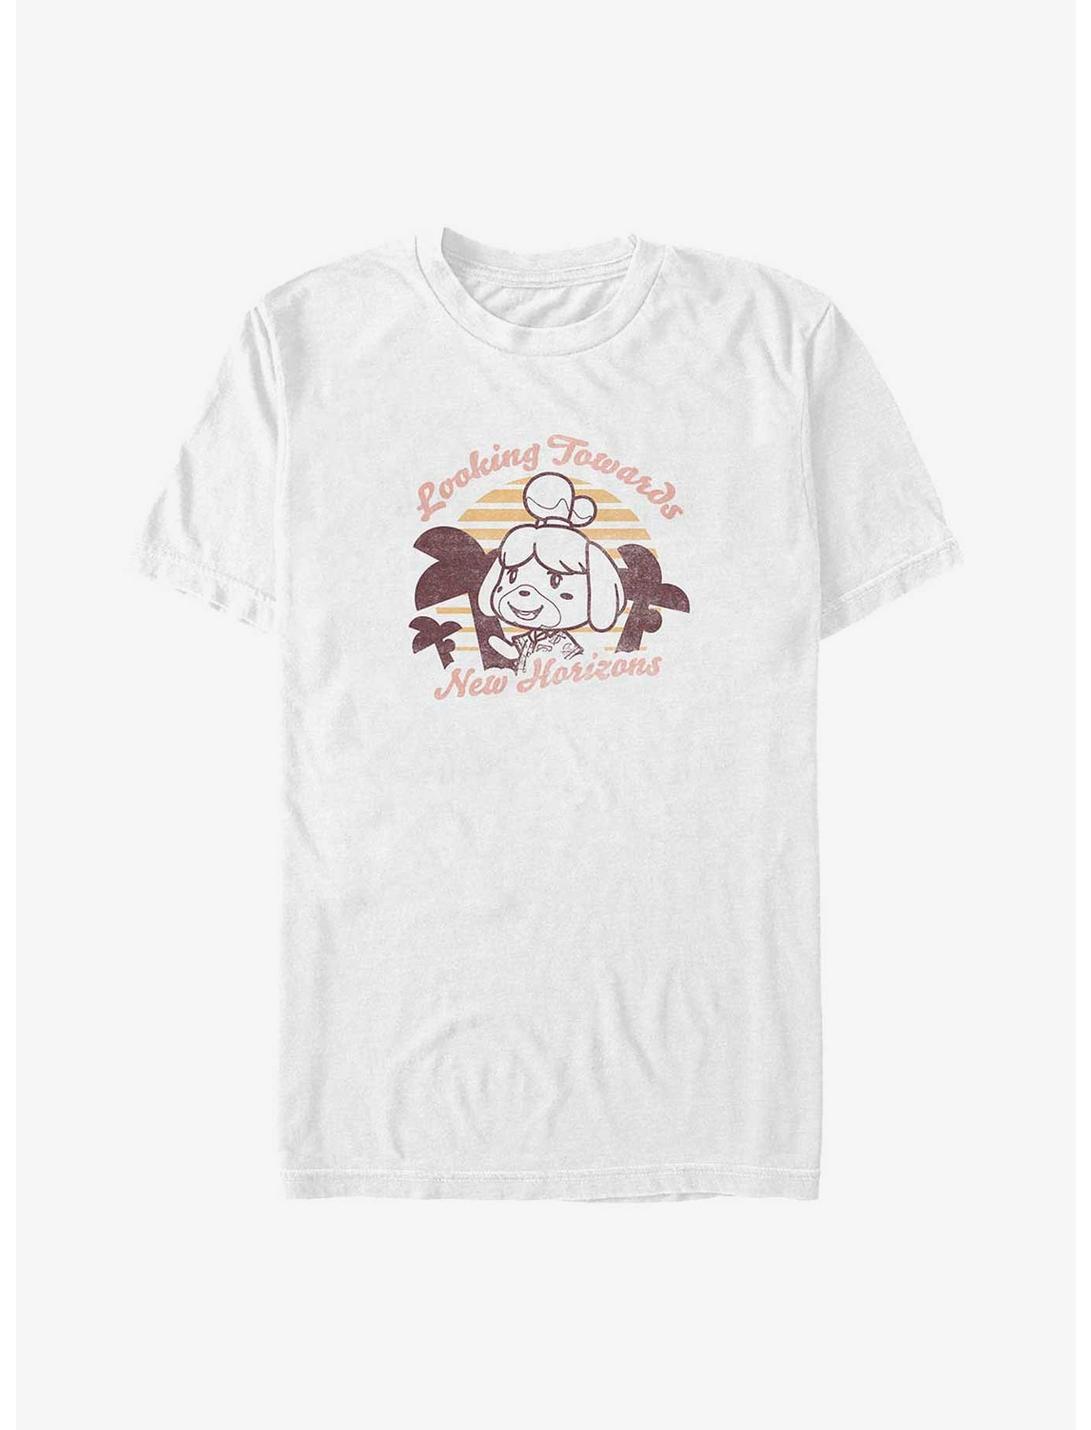 Animal Crossing New Horizons Sunset Isabelle Big & Tall T-Shirt, WHITE, hi-res